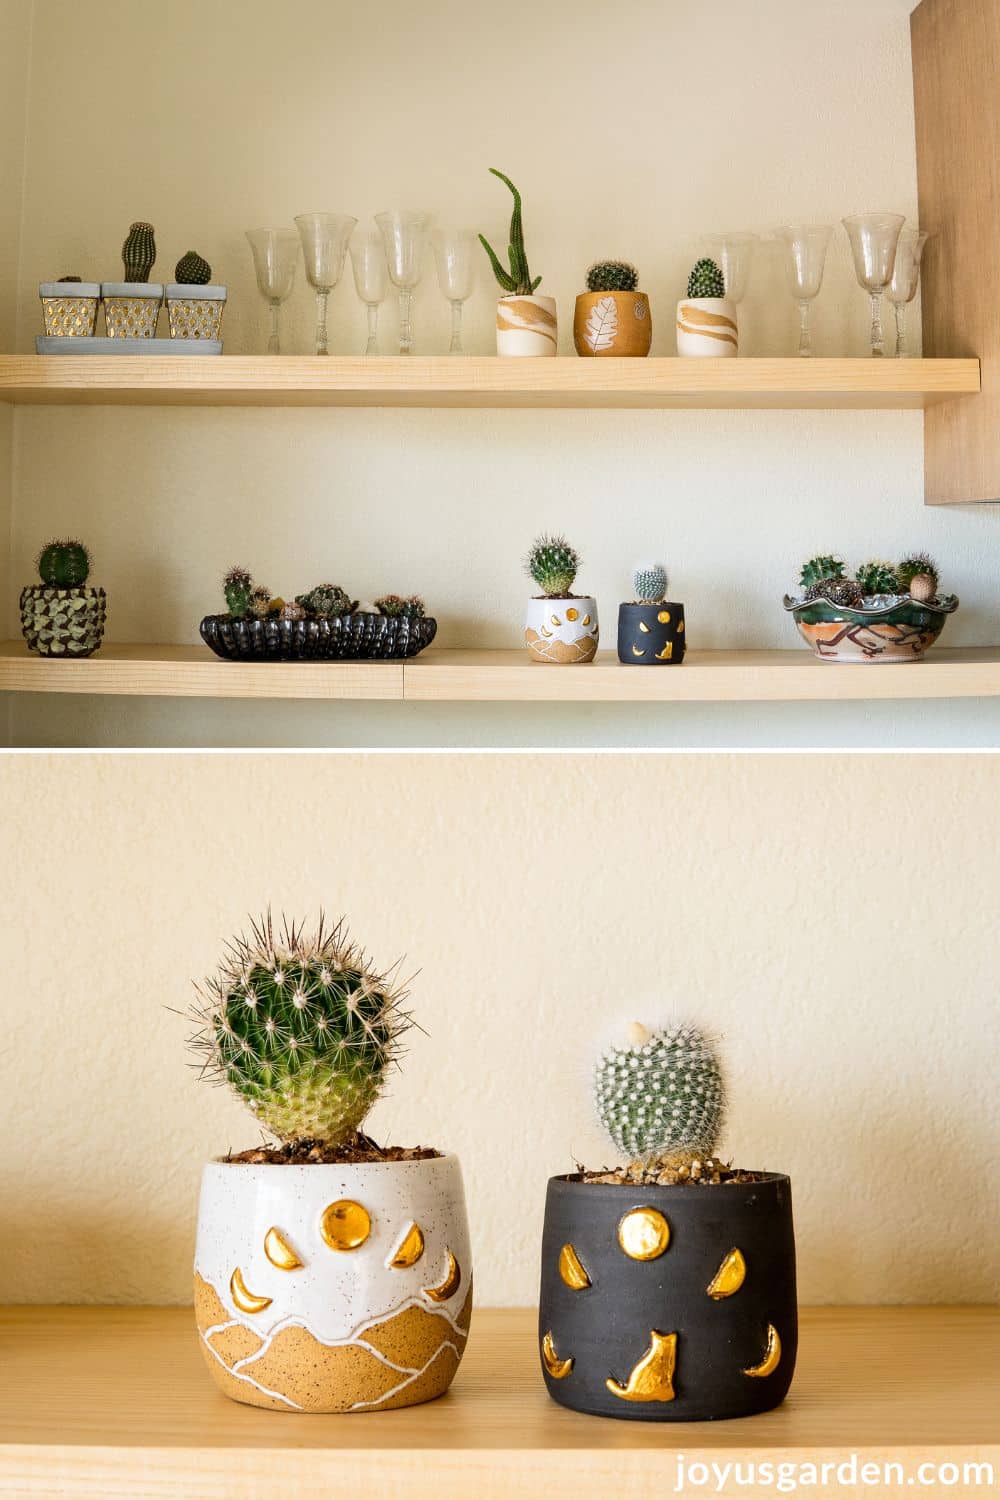 2 different photos showing a variety of cacti in different containers on floating shelves.